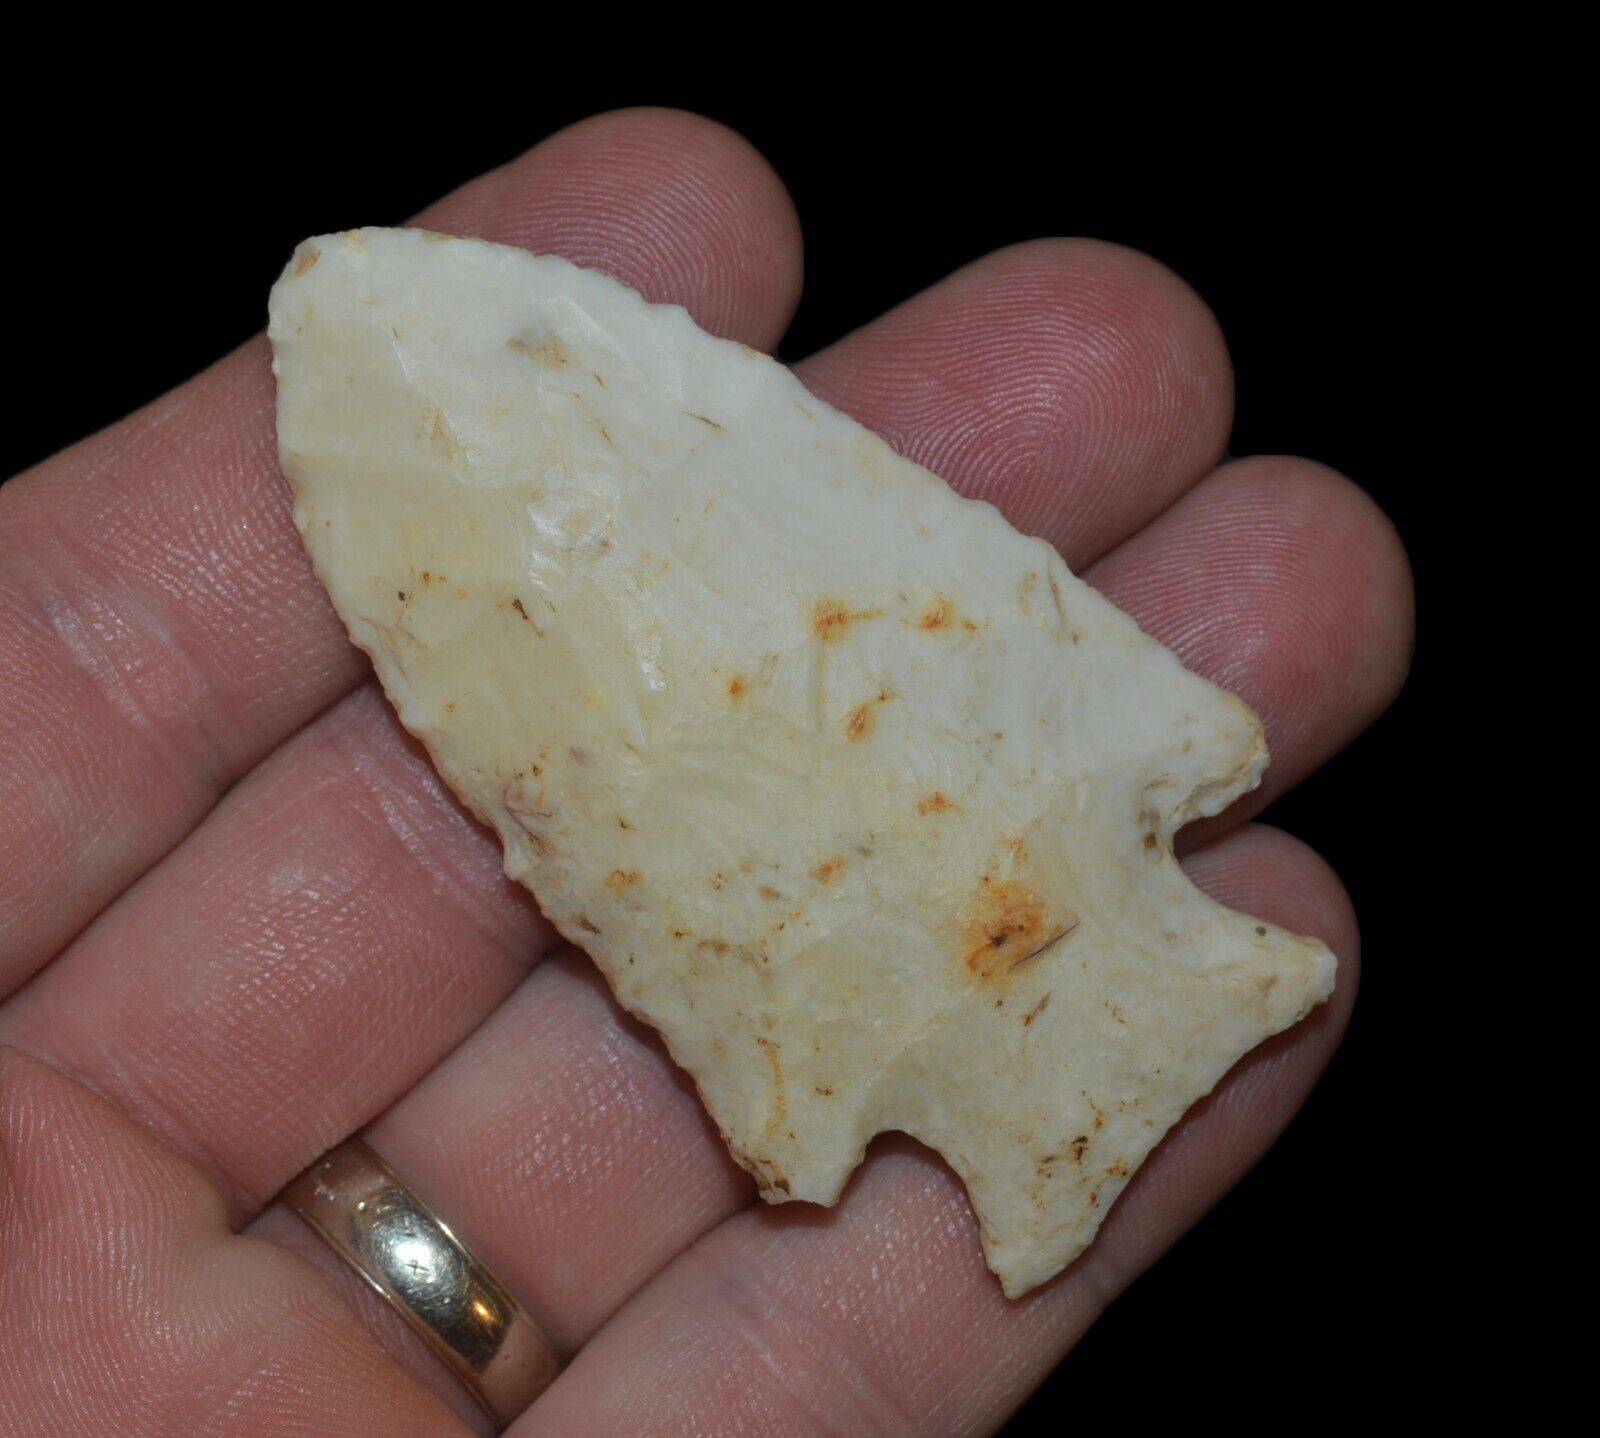 KNOBBED HARDIN PIKE CO ILLINOIS INDIAN ARROWHEAD ARTIFACT COLLECTIBLE RELIC